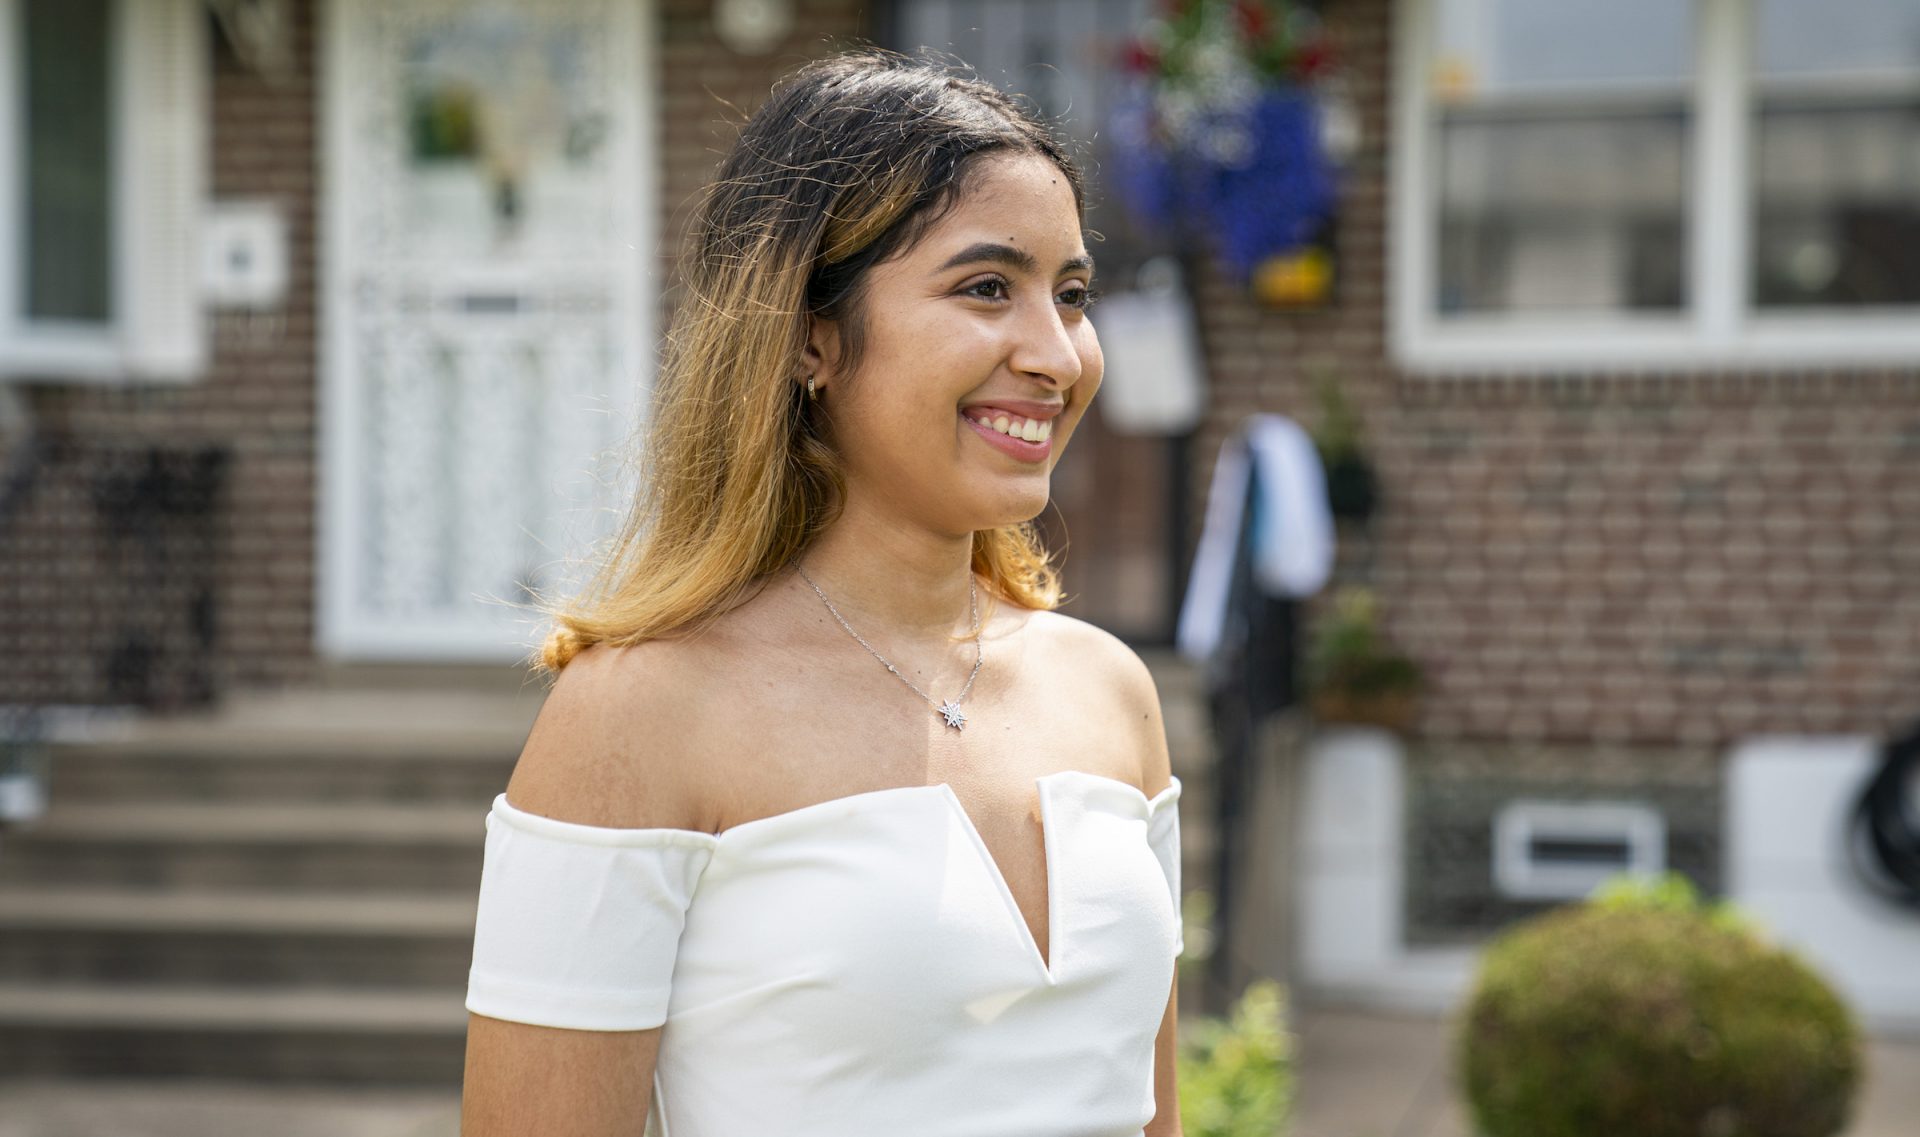 Ashely Acevedo, 18, grew up in Juniata and became a star student at Little Flower Catholic High School for Girls.